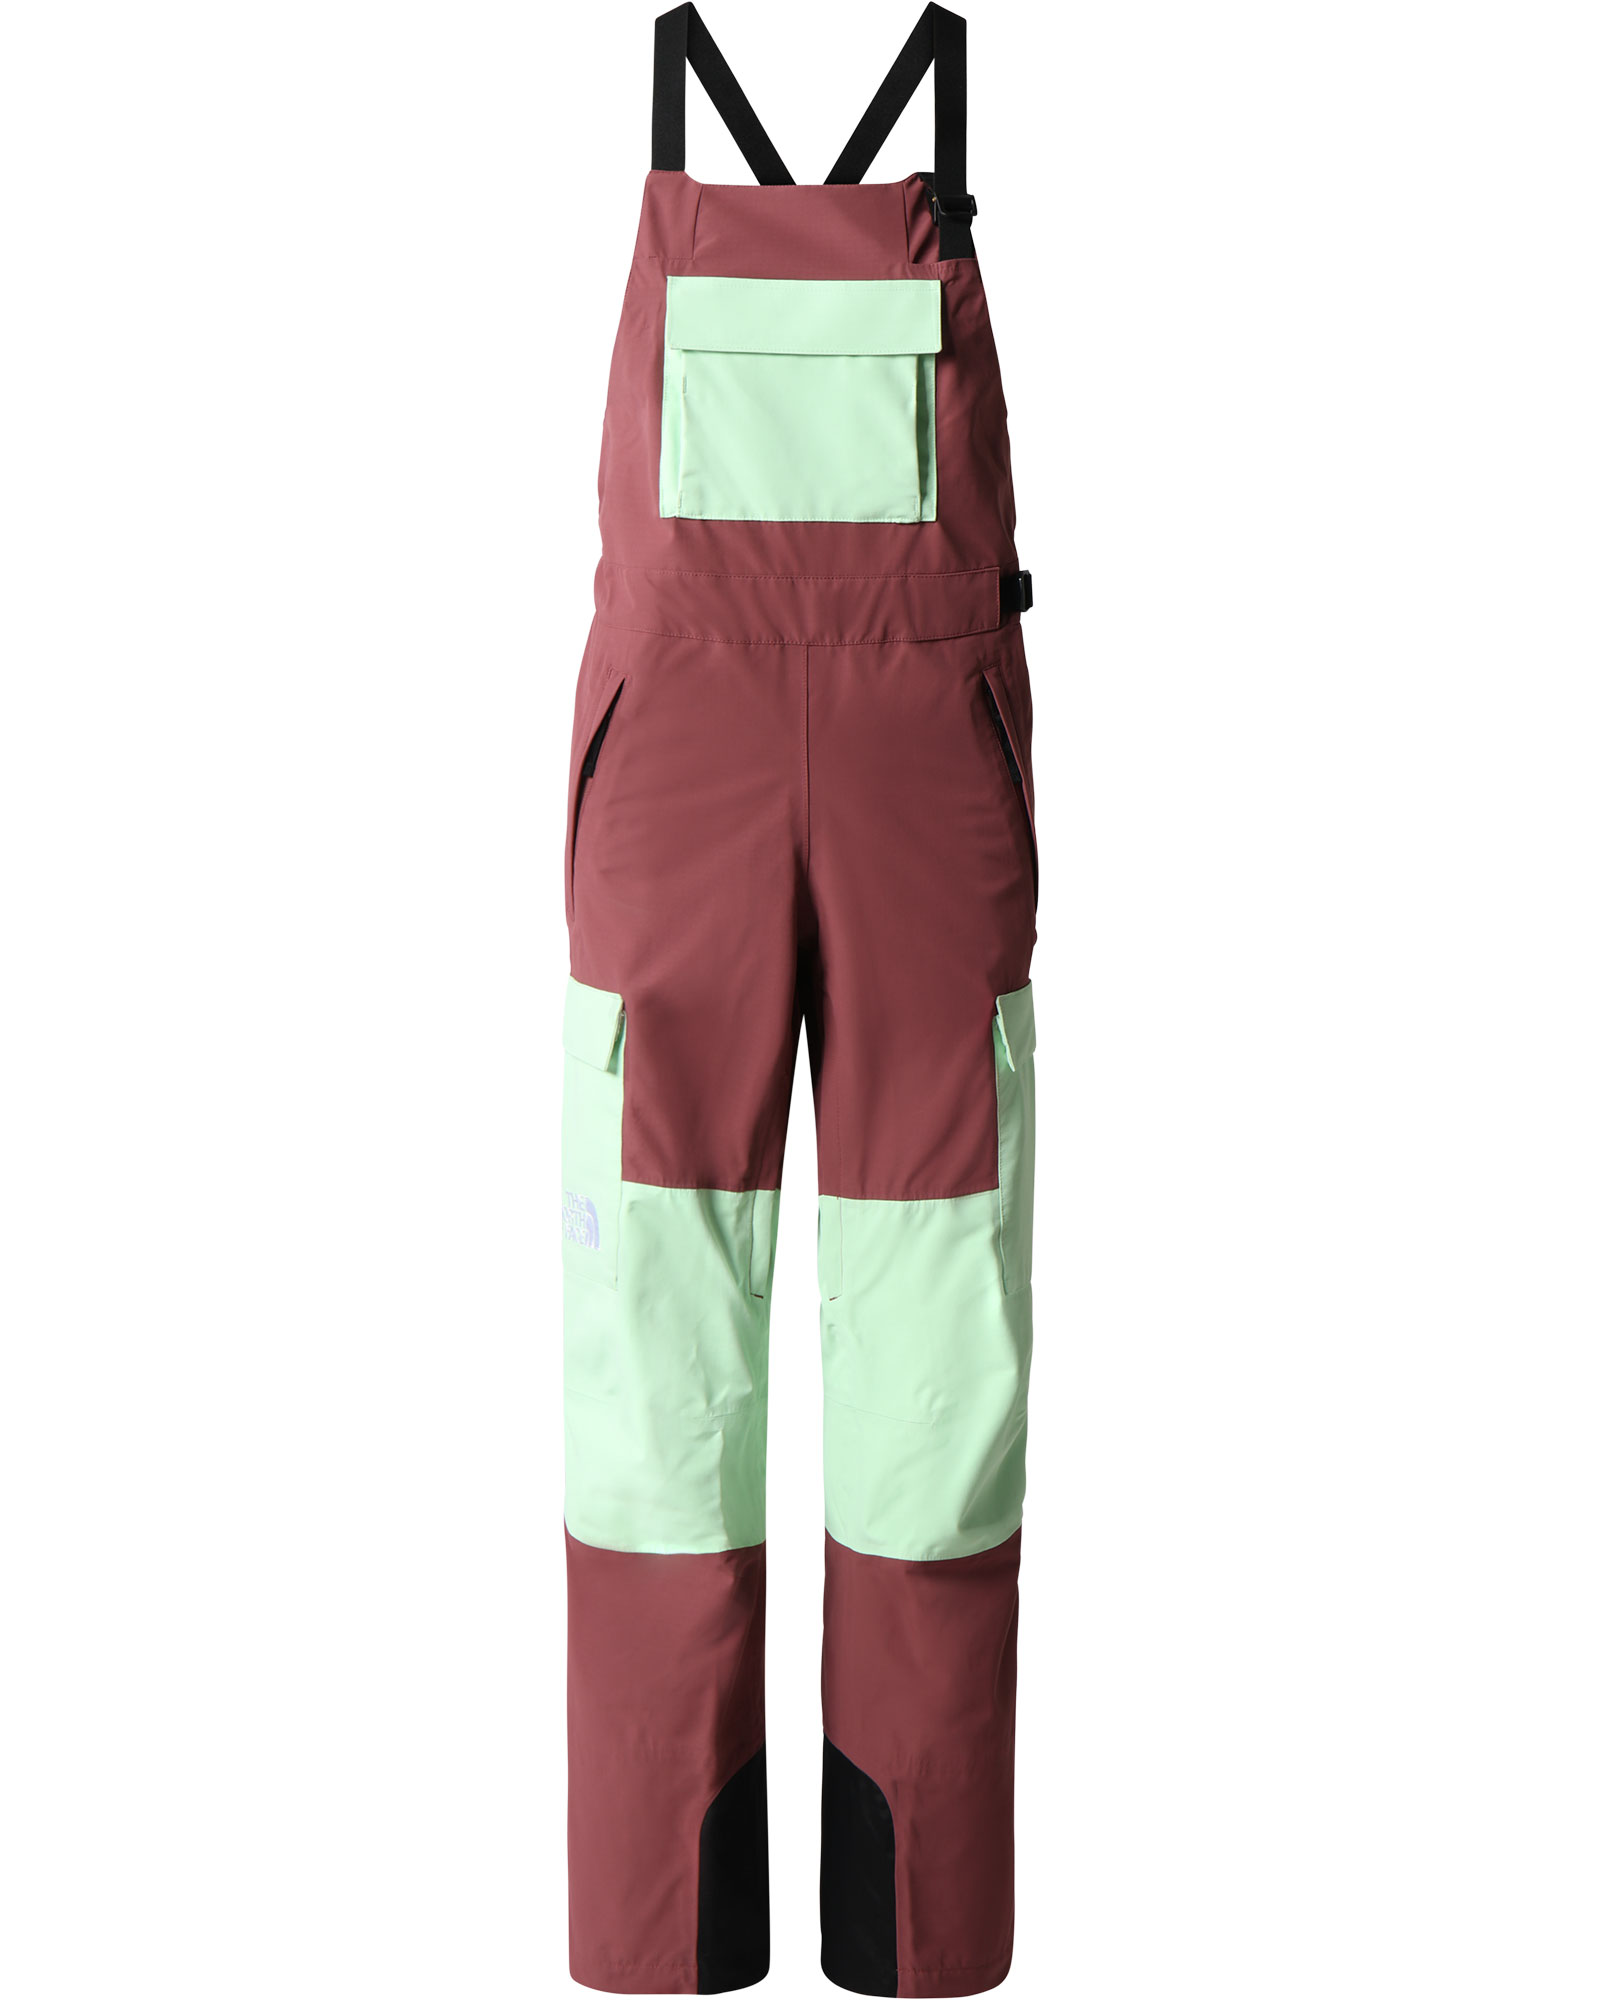 The North Face Dragline Women’s Bib Pants - Wild Ginger/Patina Green S